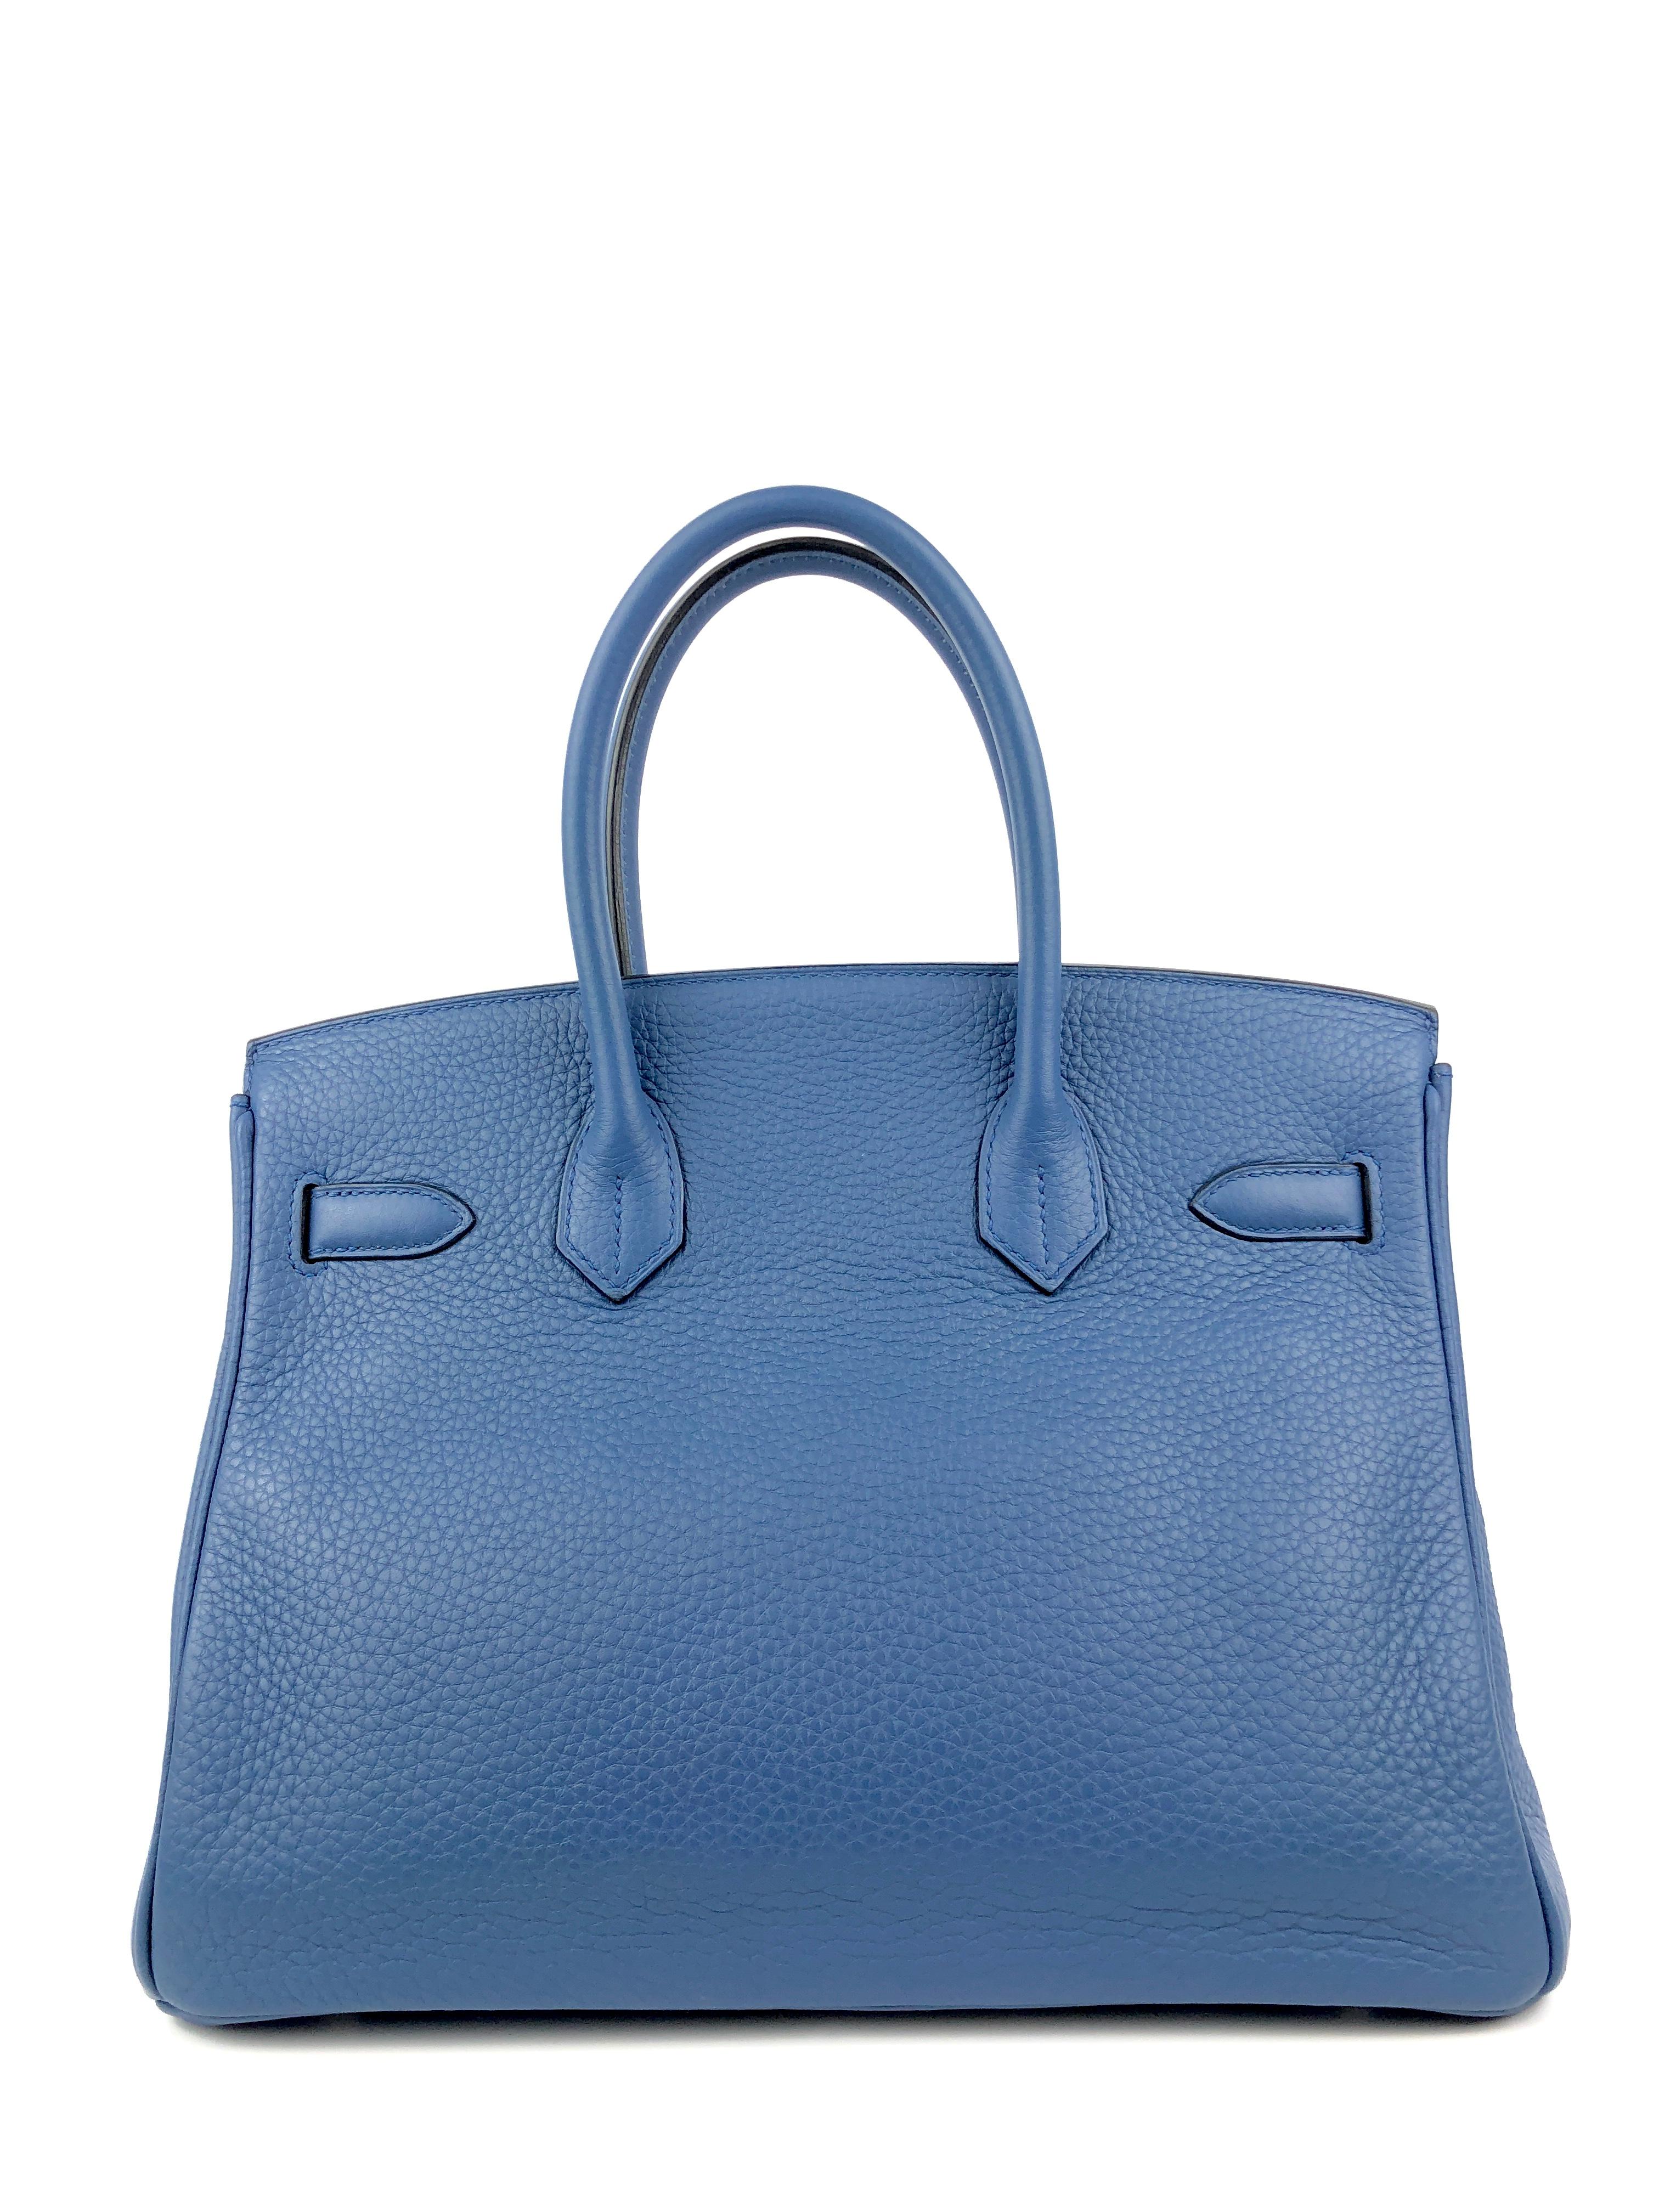 This authentic Hermès  Pebble Blue Togo 30 cm Birkin is in excellent plus condition.  A must have for blue lovers, the subtle shade is universally flattering for all year round.  
Textured and scratch resistant Togo leather is soft to the hand and